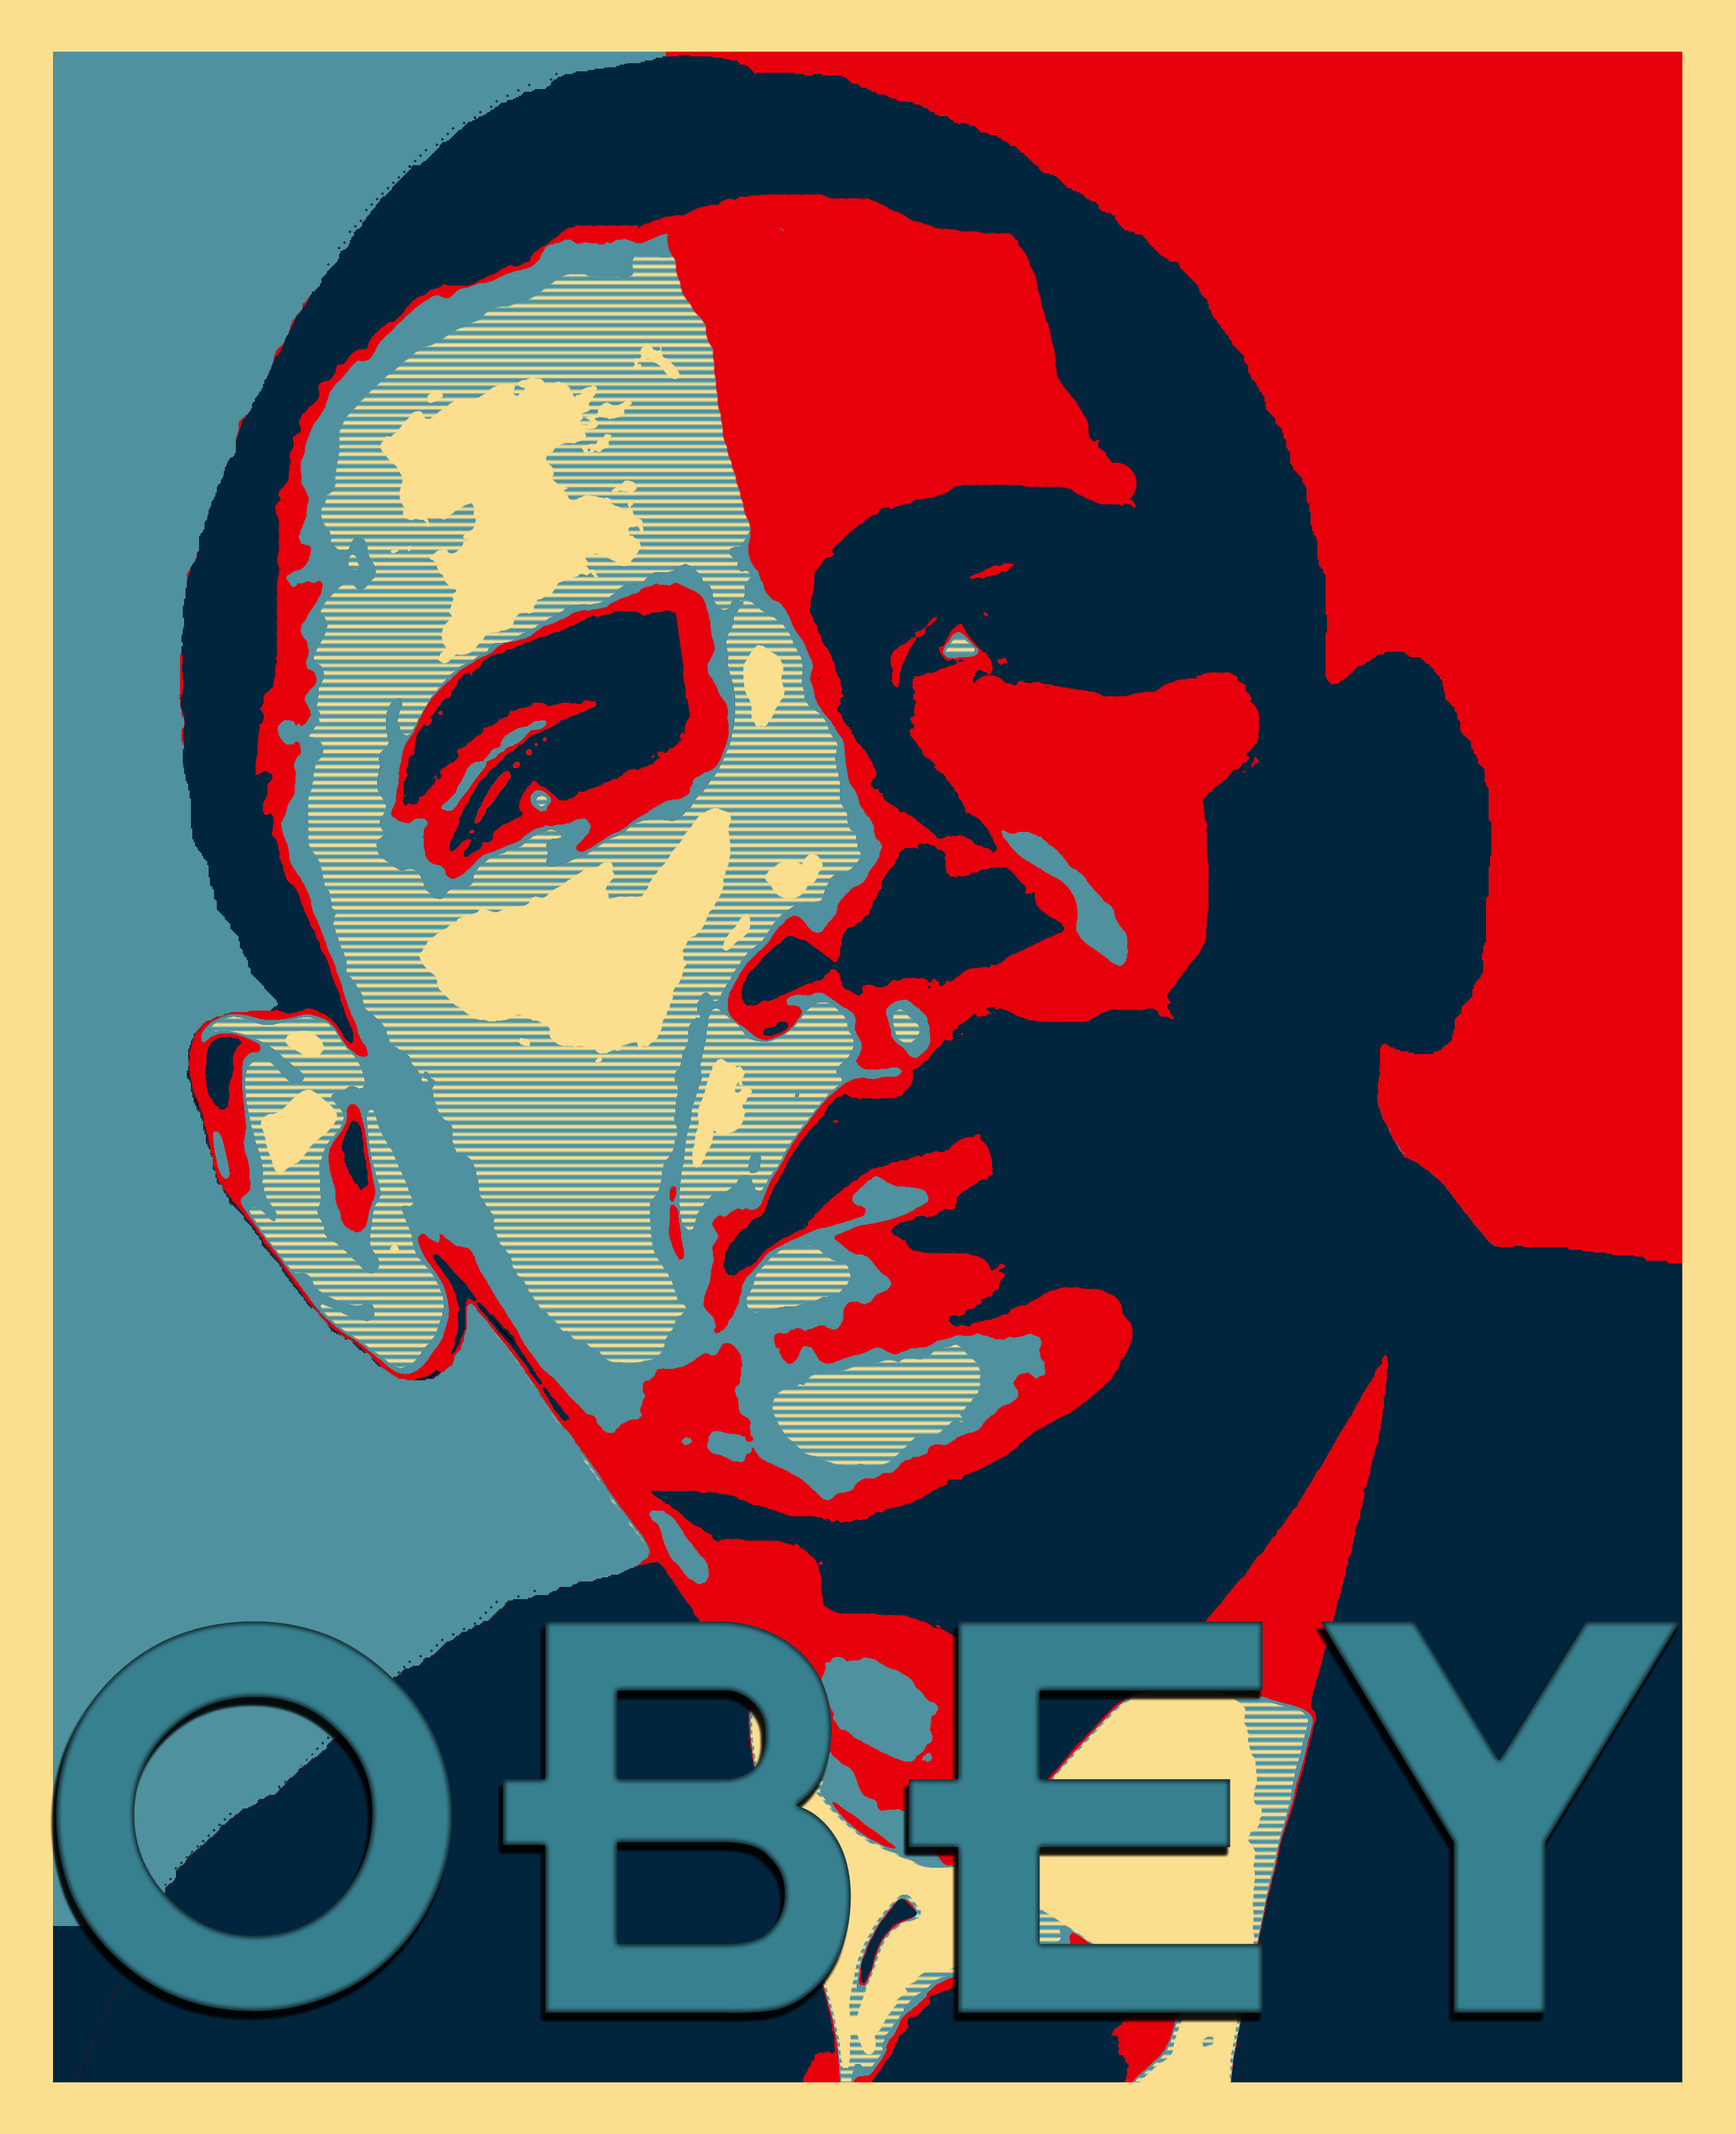 brack_obama_obey_by_baabasart-d6dpa2b.png